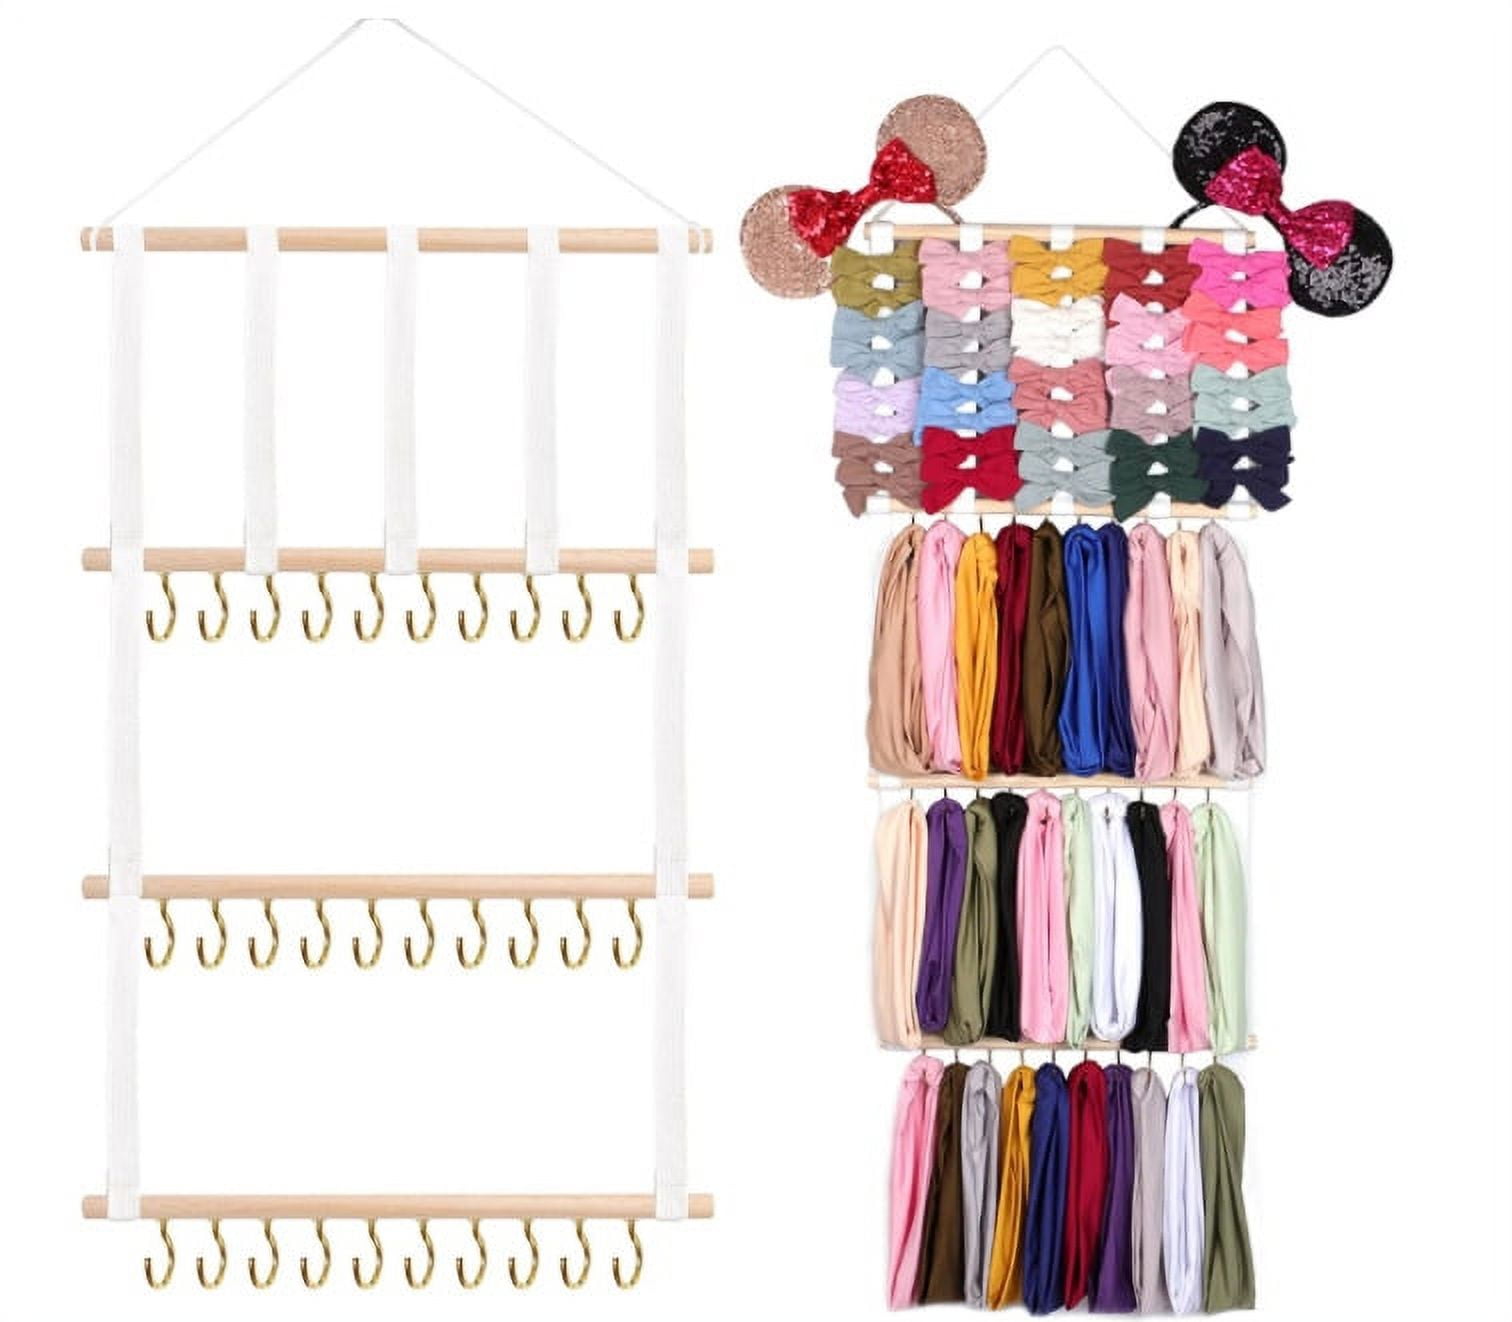 INS Portable Baby Hair Bow Holder For Girls Organize Hair Bow Holder And  Belts With Nursery Decor And Kids Bow Hanger From Xujiaxiaohai, $4.38